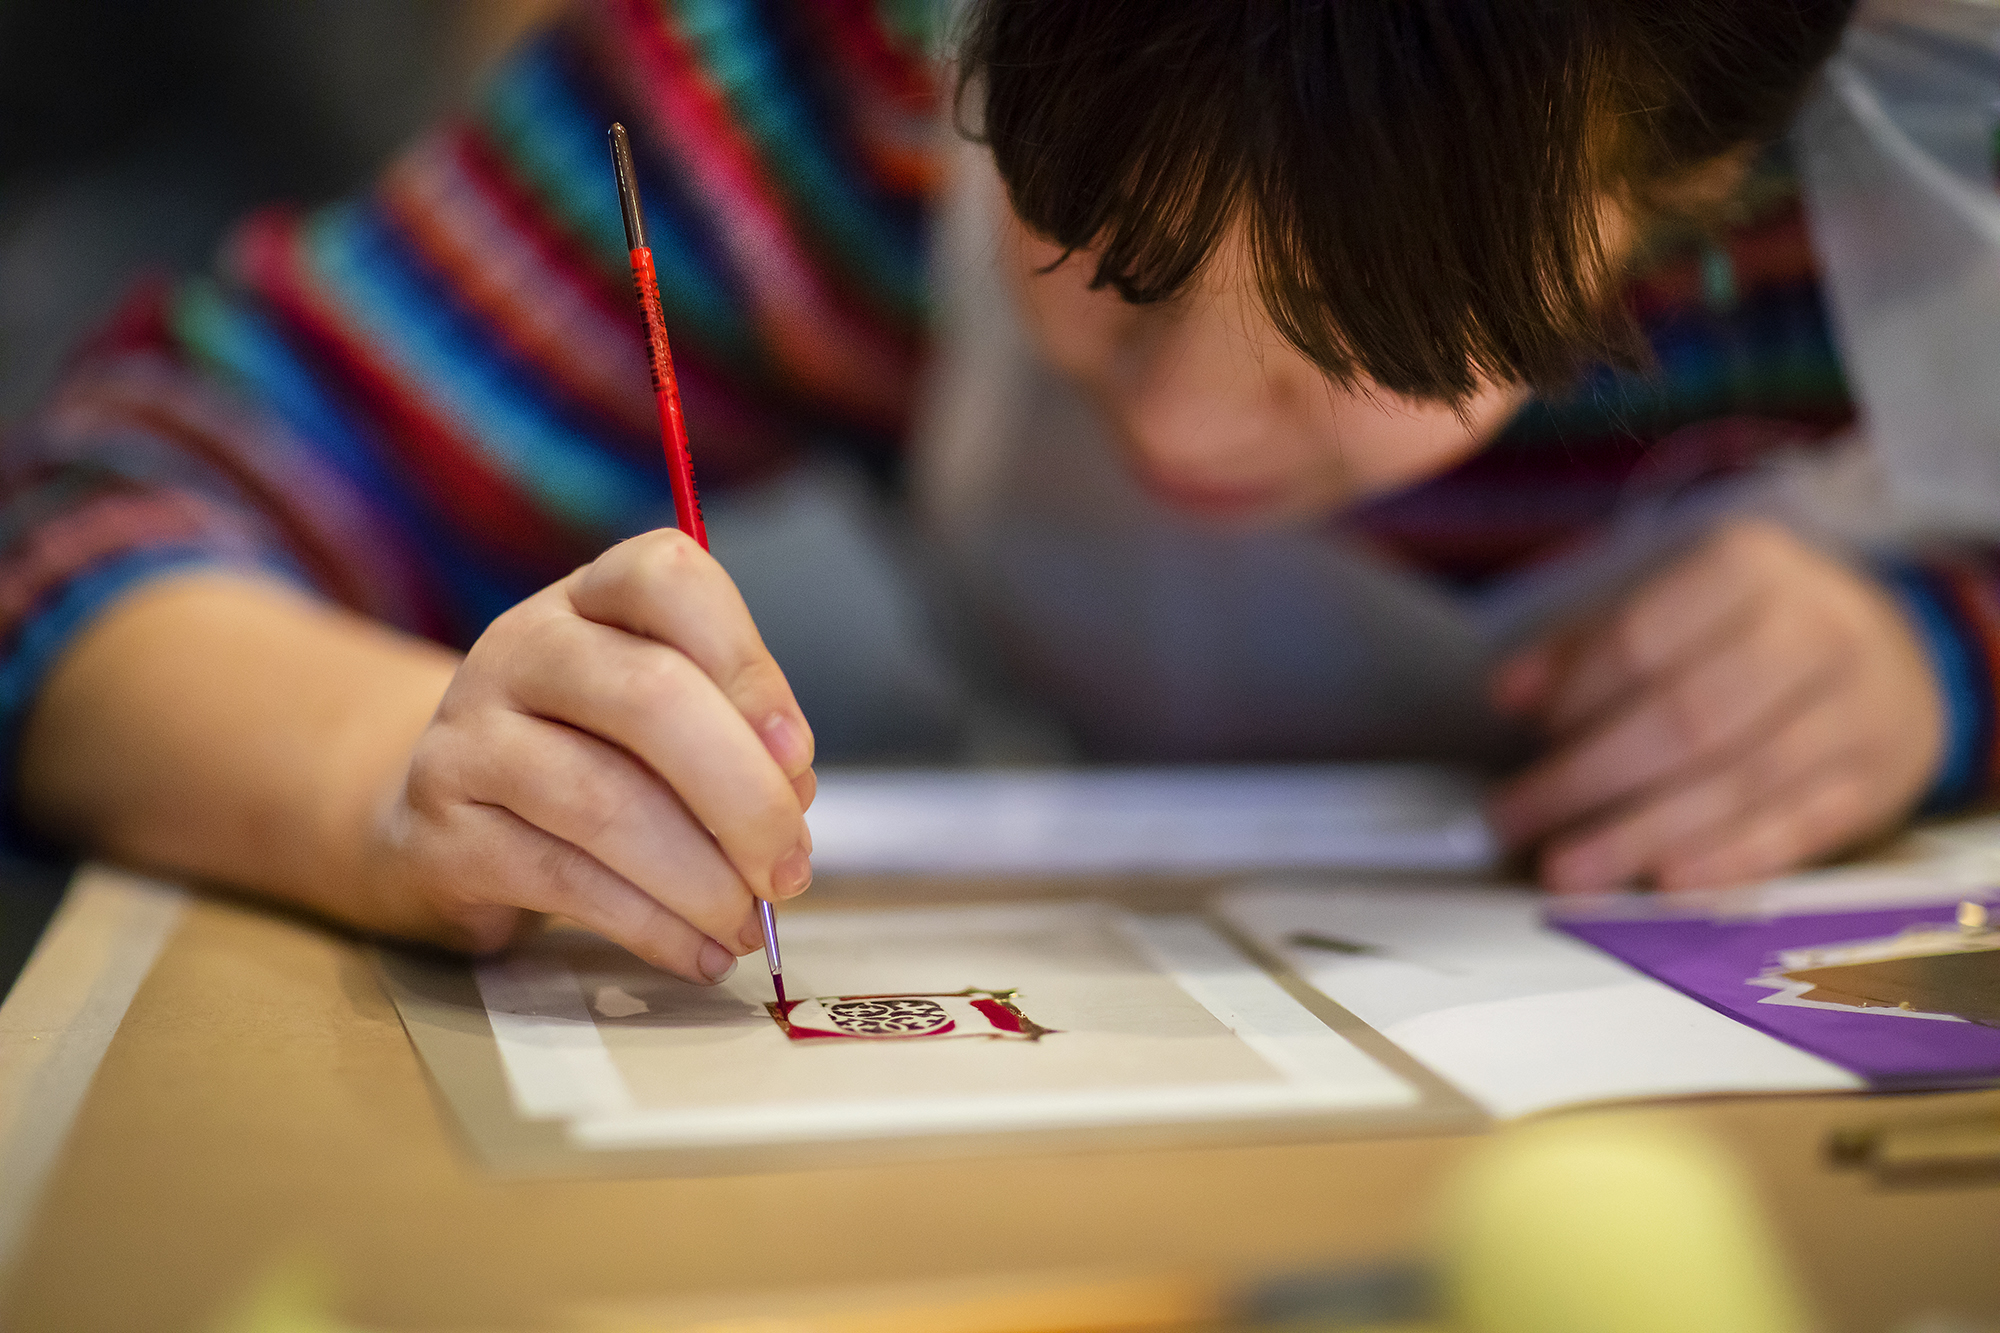 closeup of student with paint brush painting red paint on small image on paper at a table